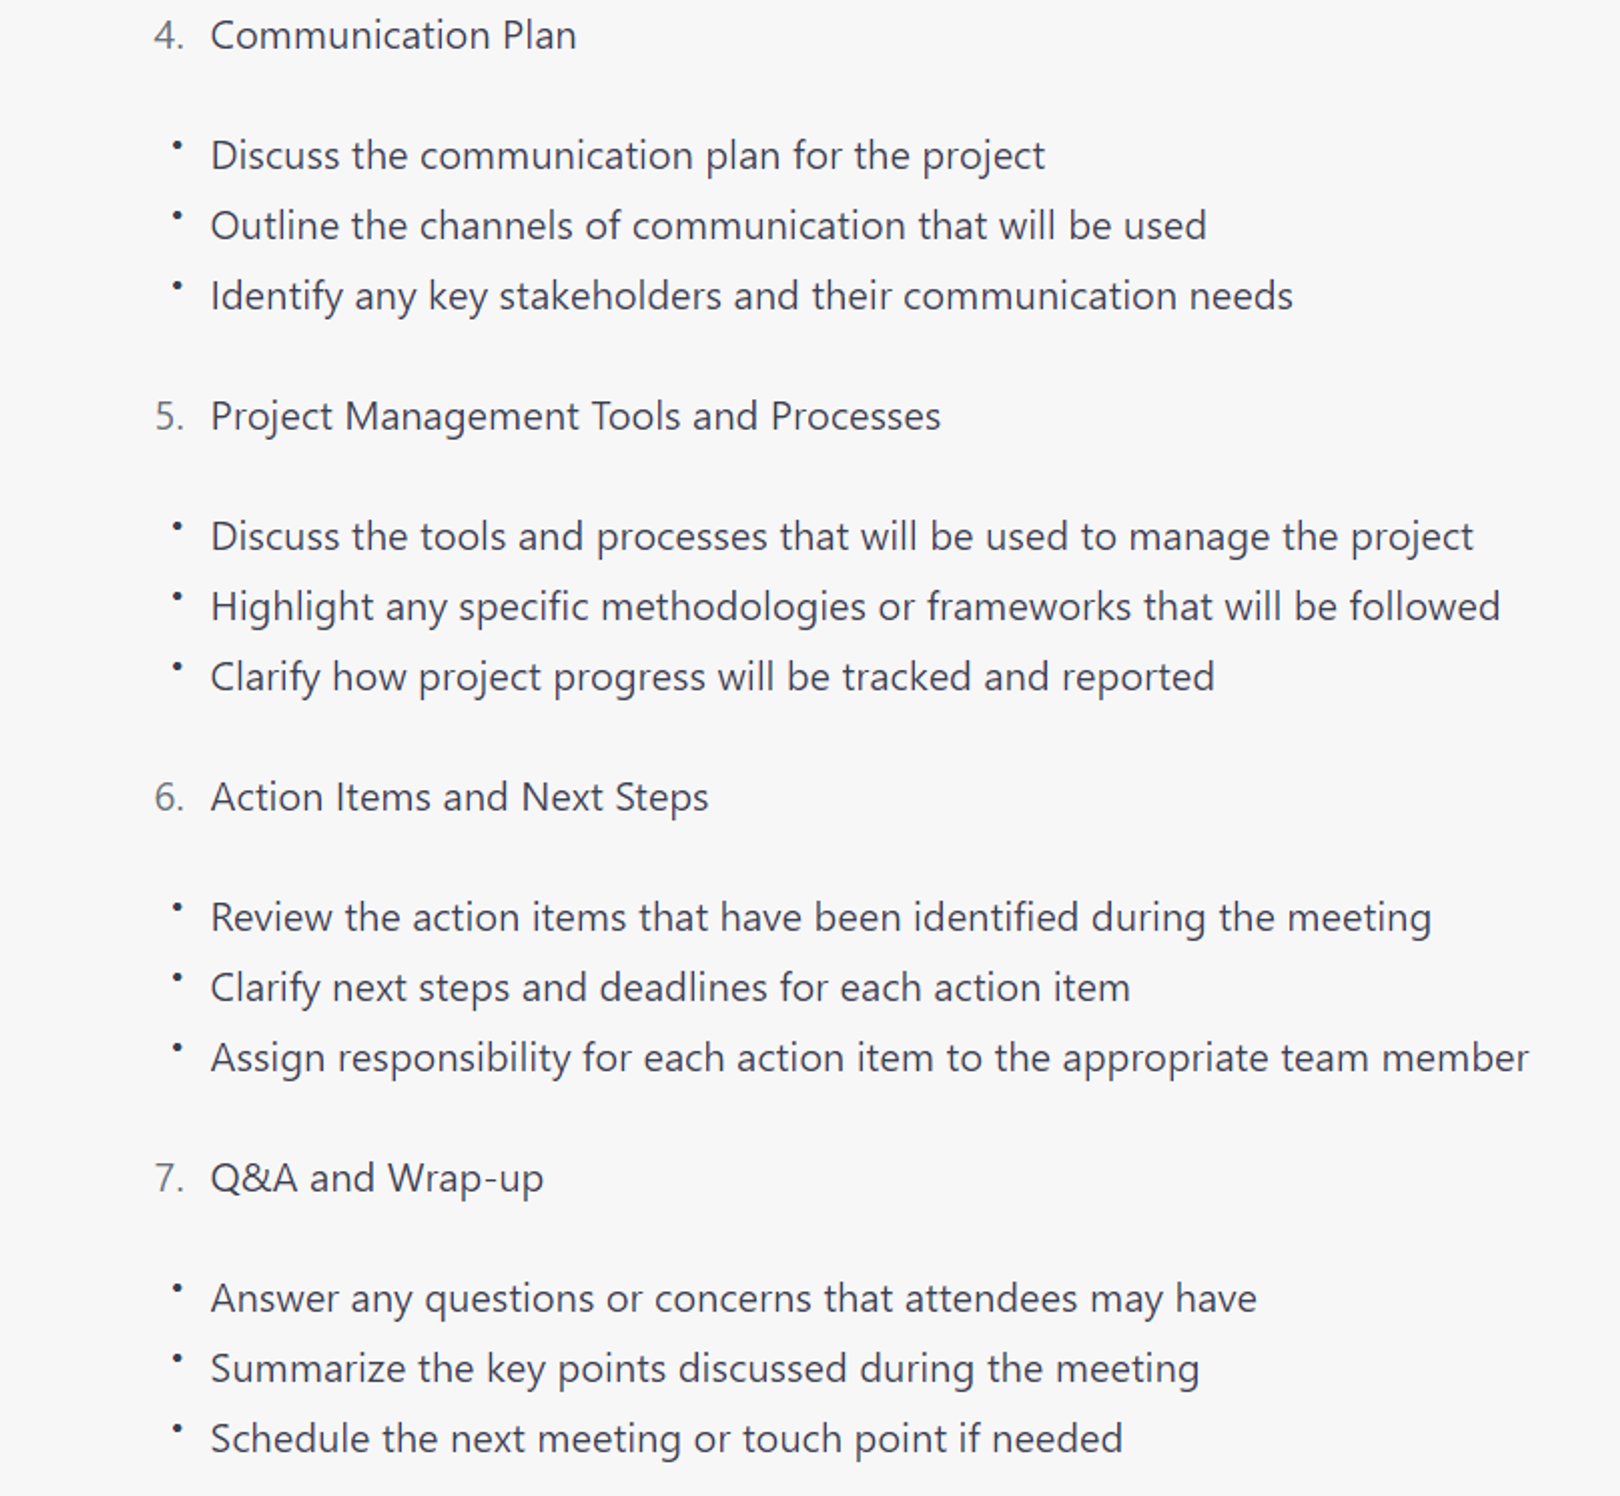  7 Innovative ChatGPT Prompts: Schedule project kickoff meeting